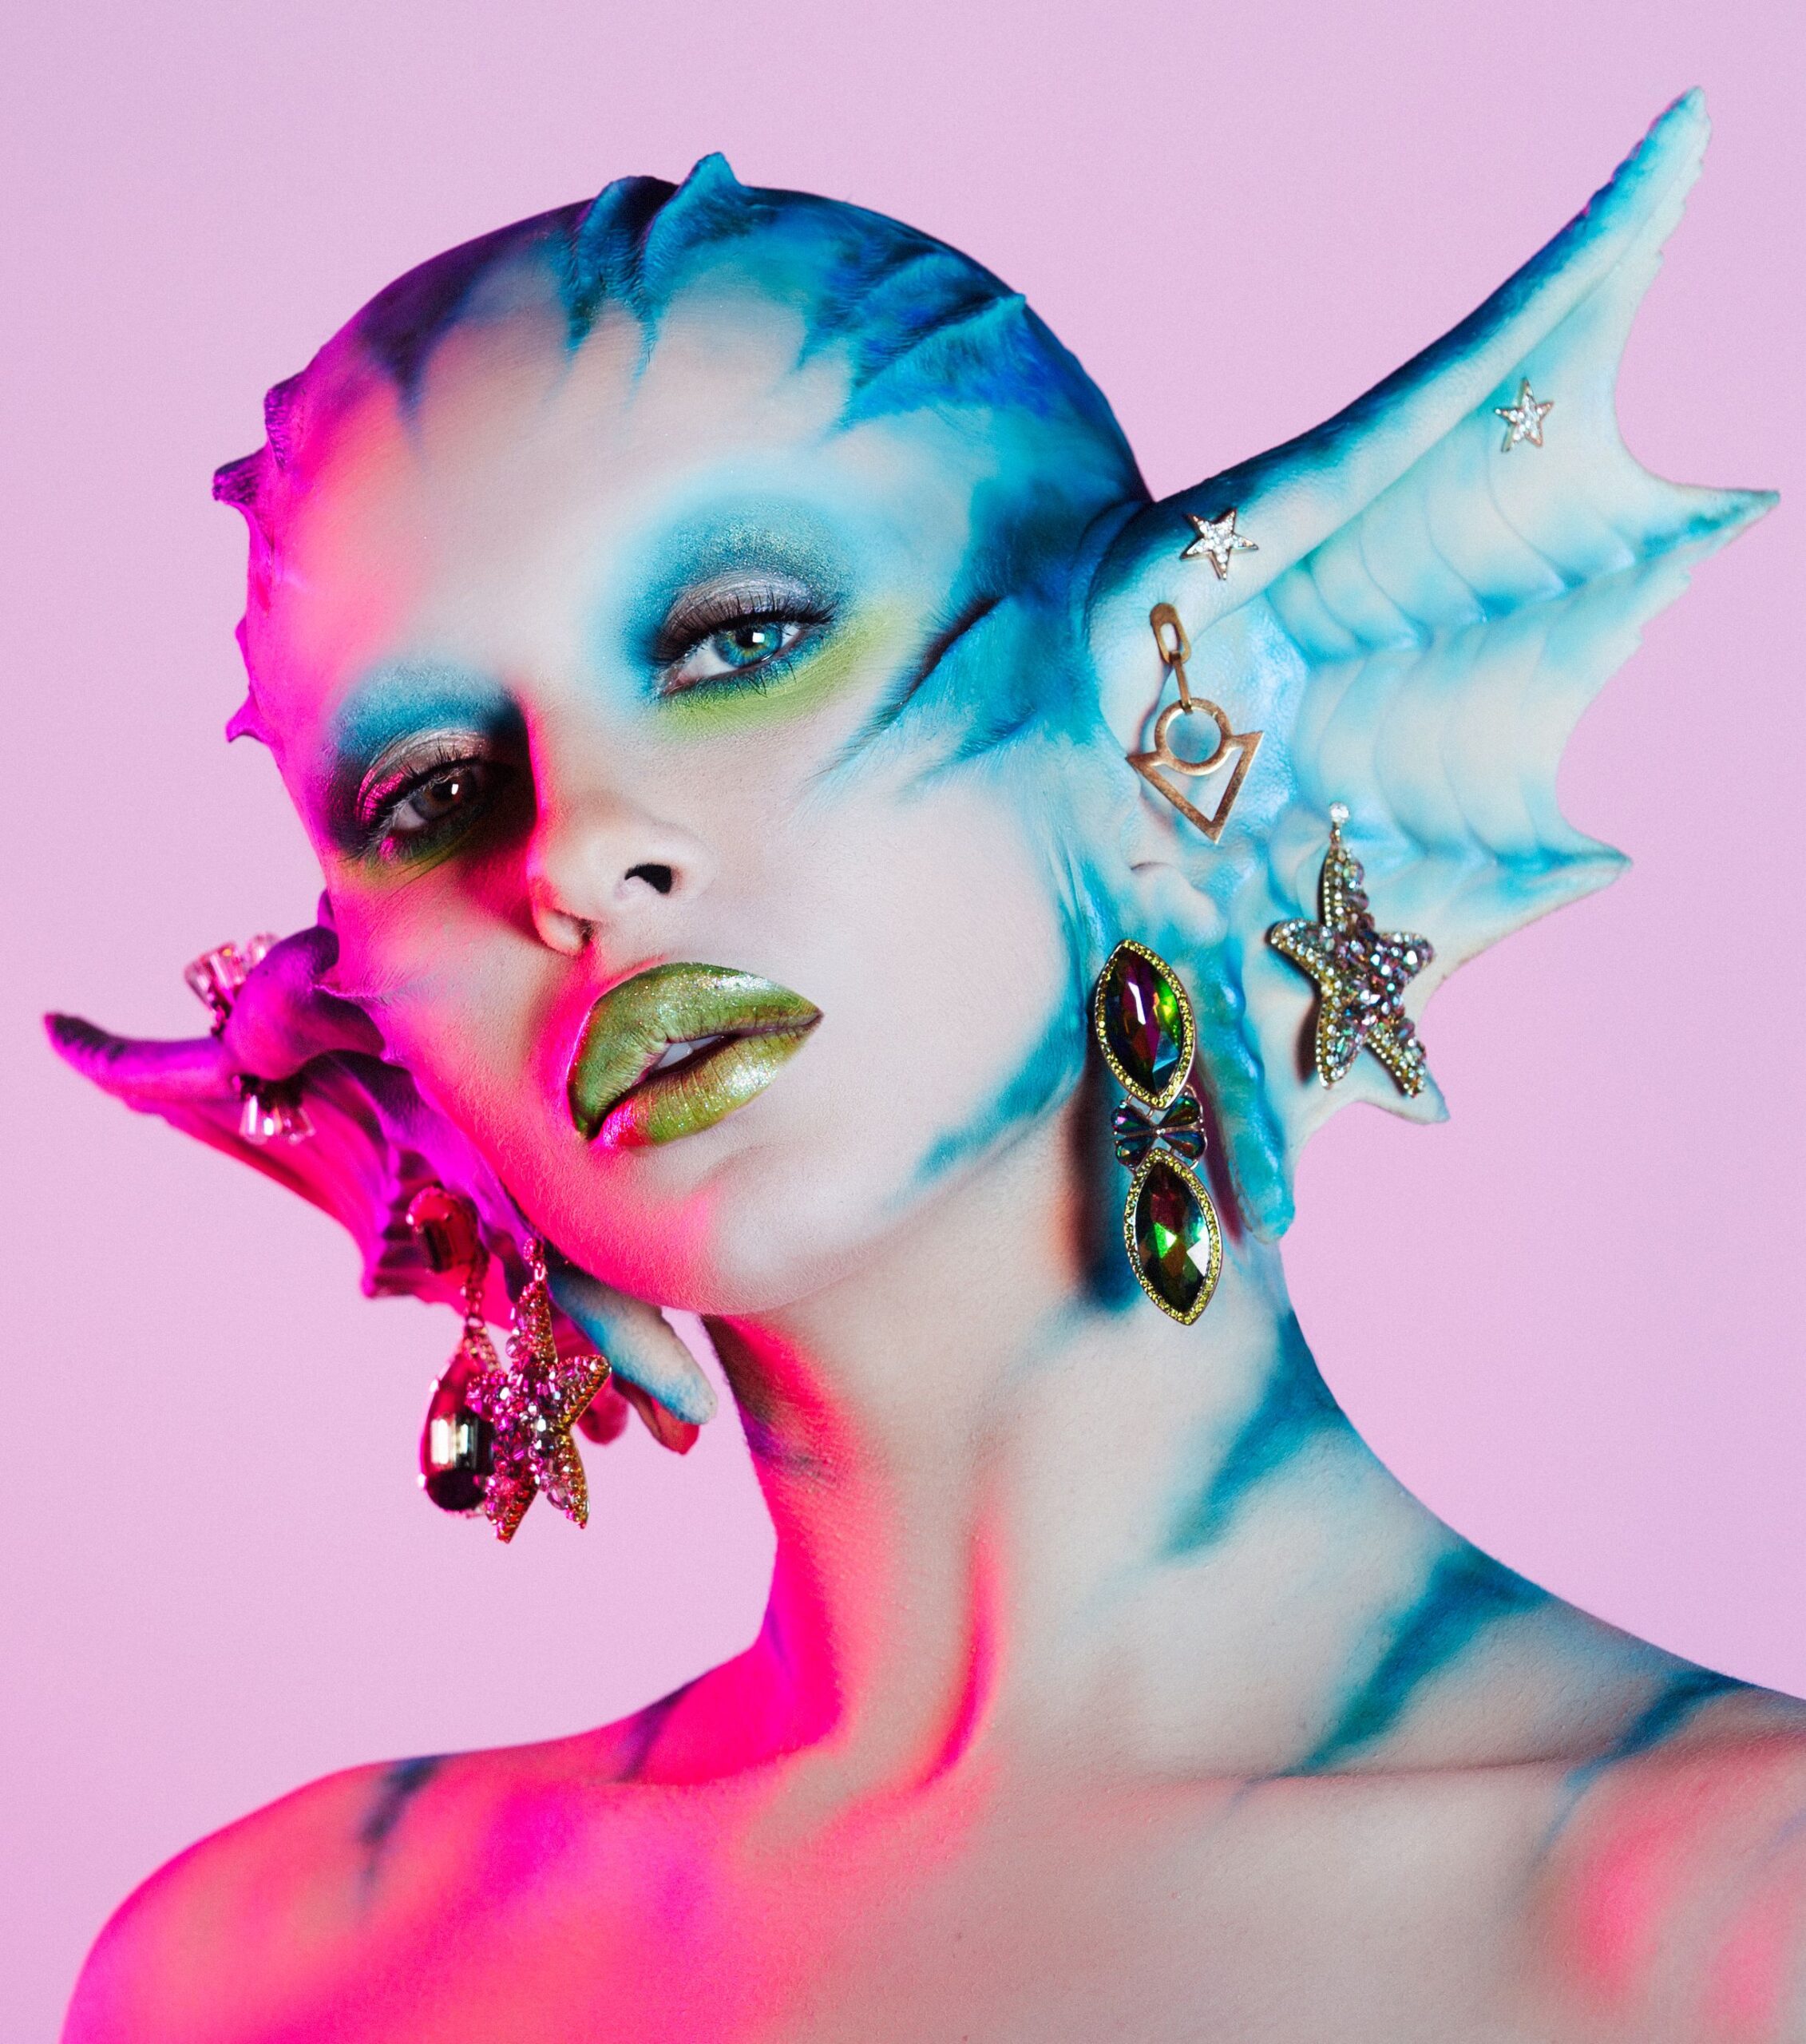 Dive Into Mermaid Makeup: Tips and Tricks
for a Stunning Halloween Look